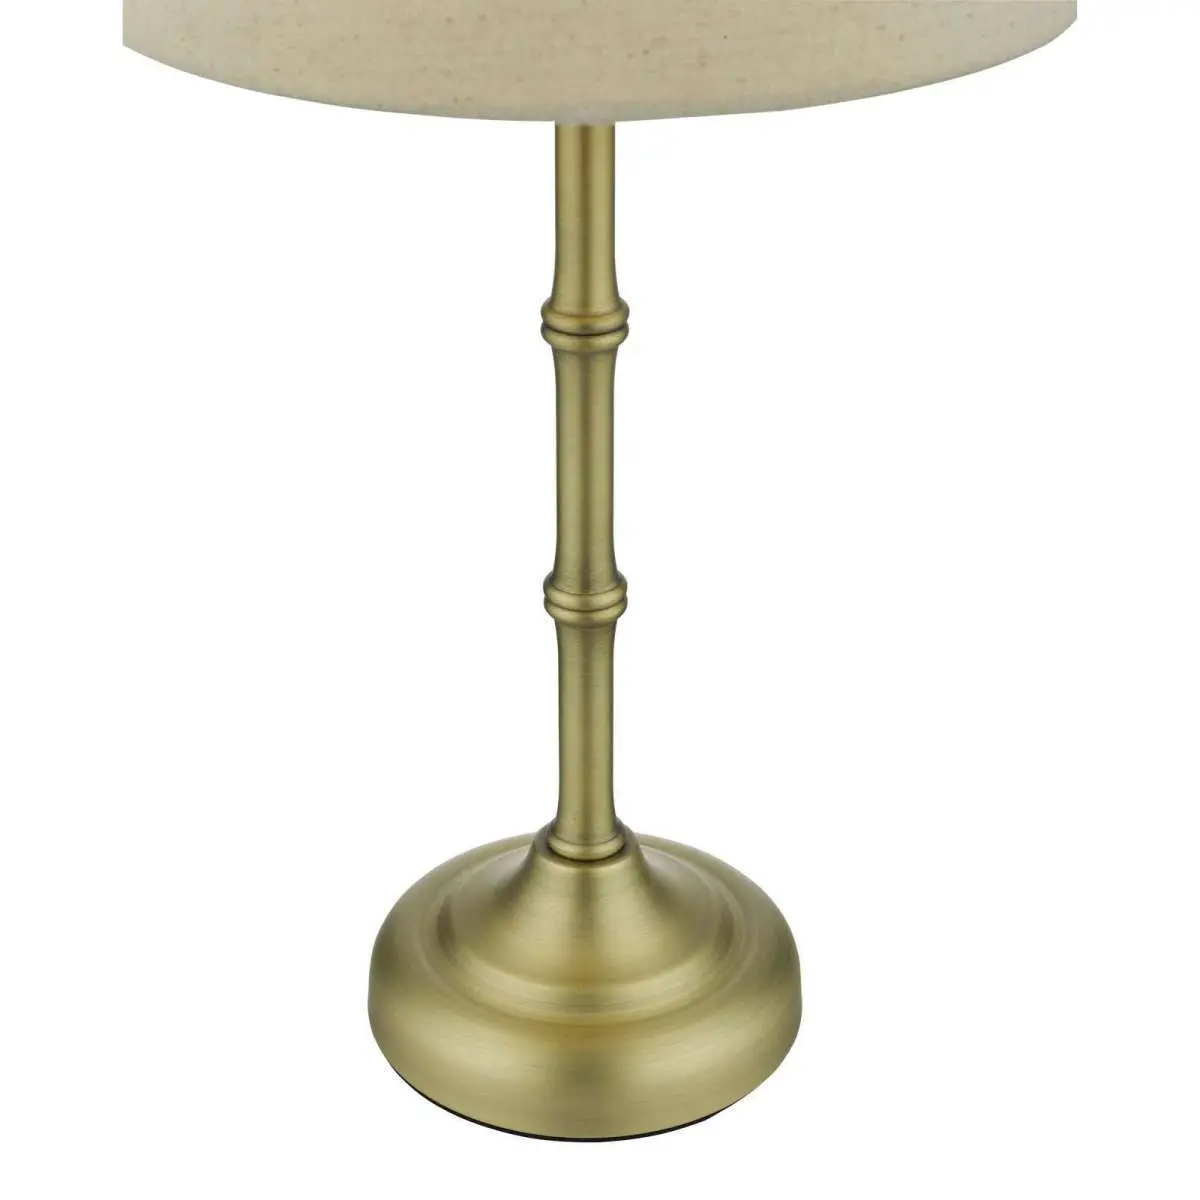 Cane Antique Brass Table Lamp C/W Shade